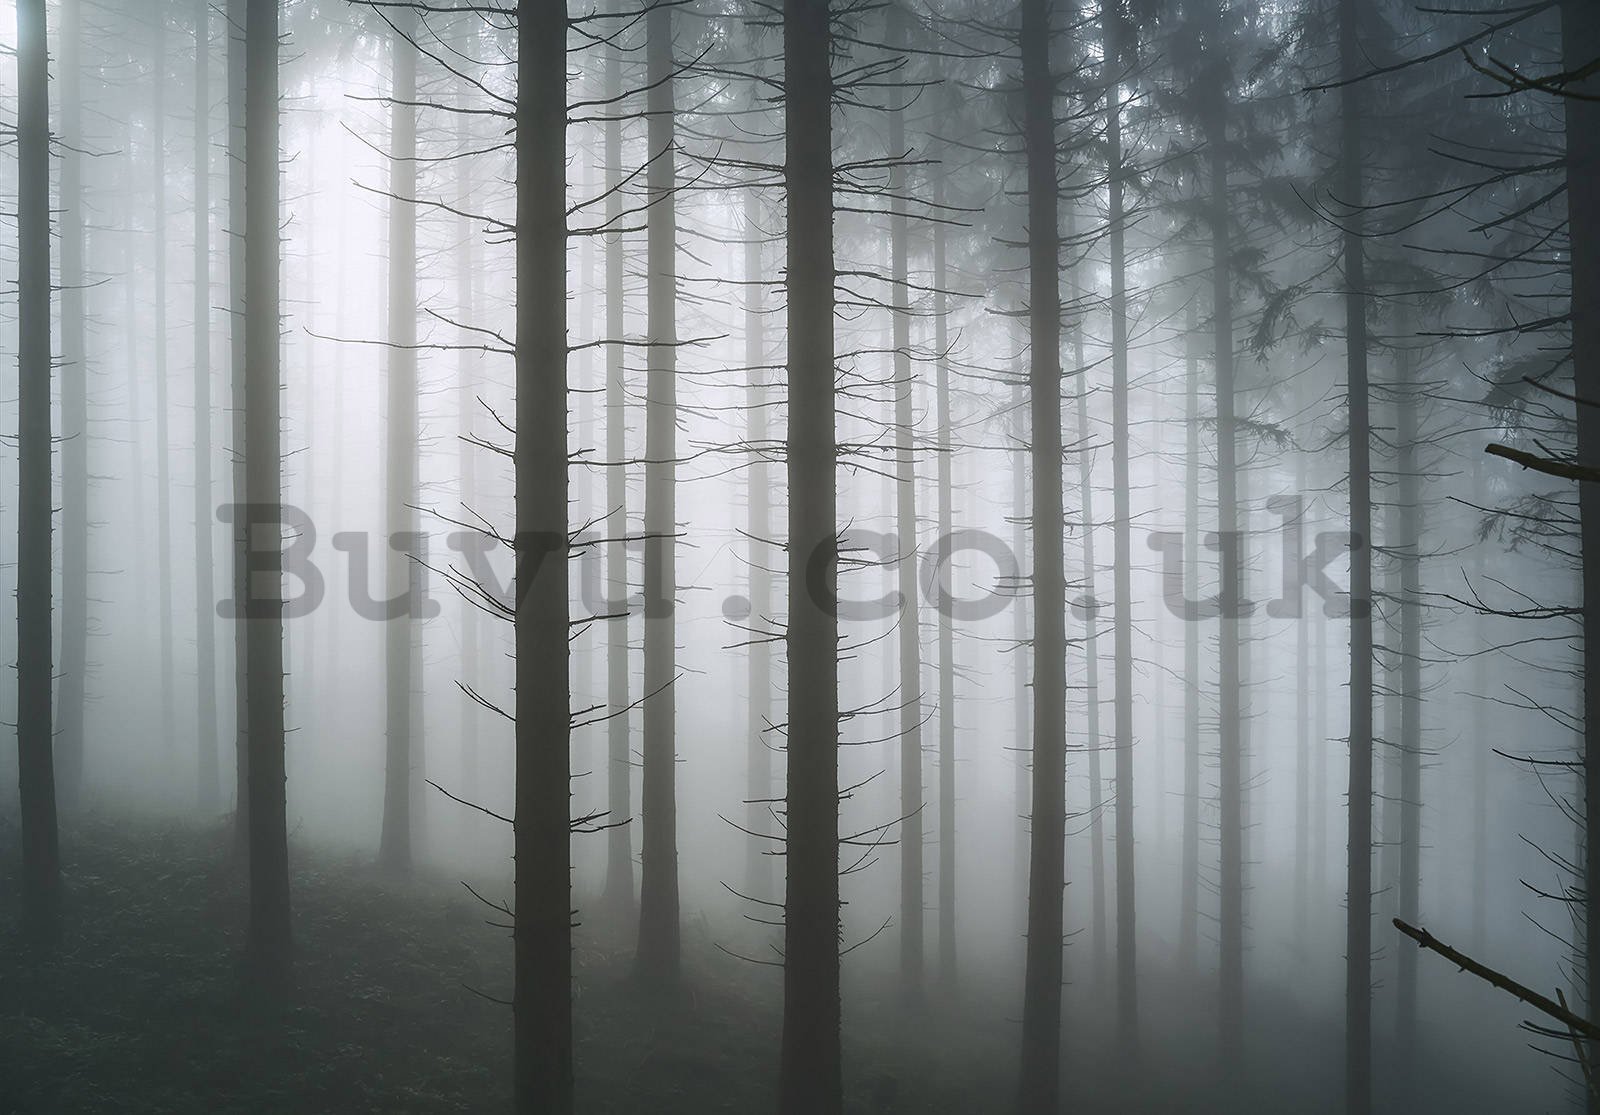 Wall mural vlies: Haunted Forest (1) - 152,5x104 cm